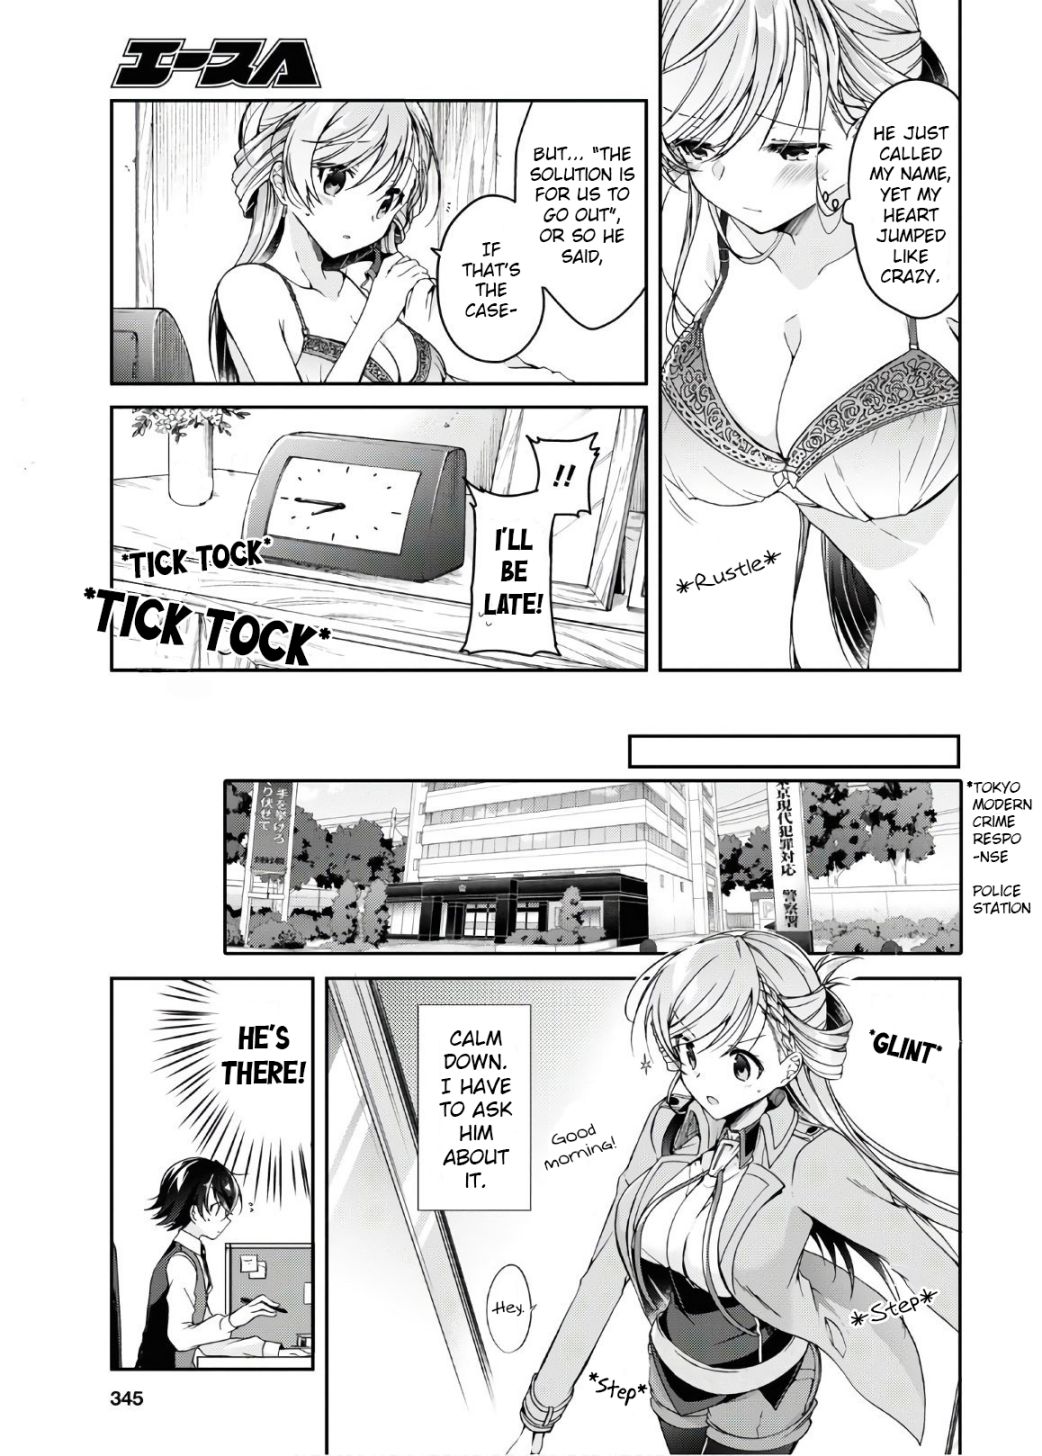 Isshiki-san Wants to Know About Love. - chapter 2 - #5